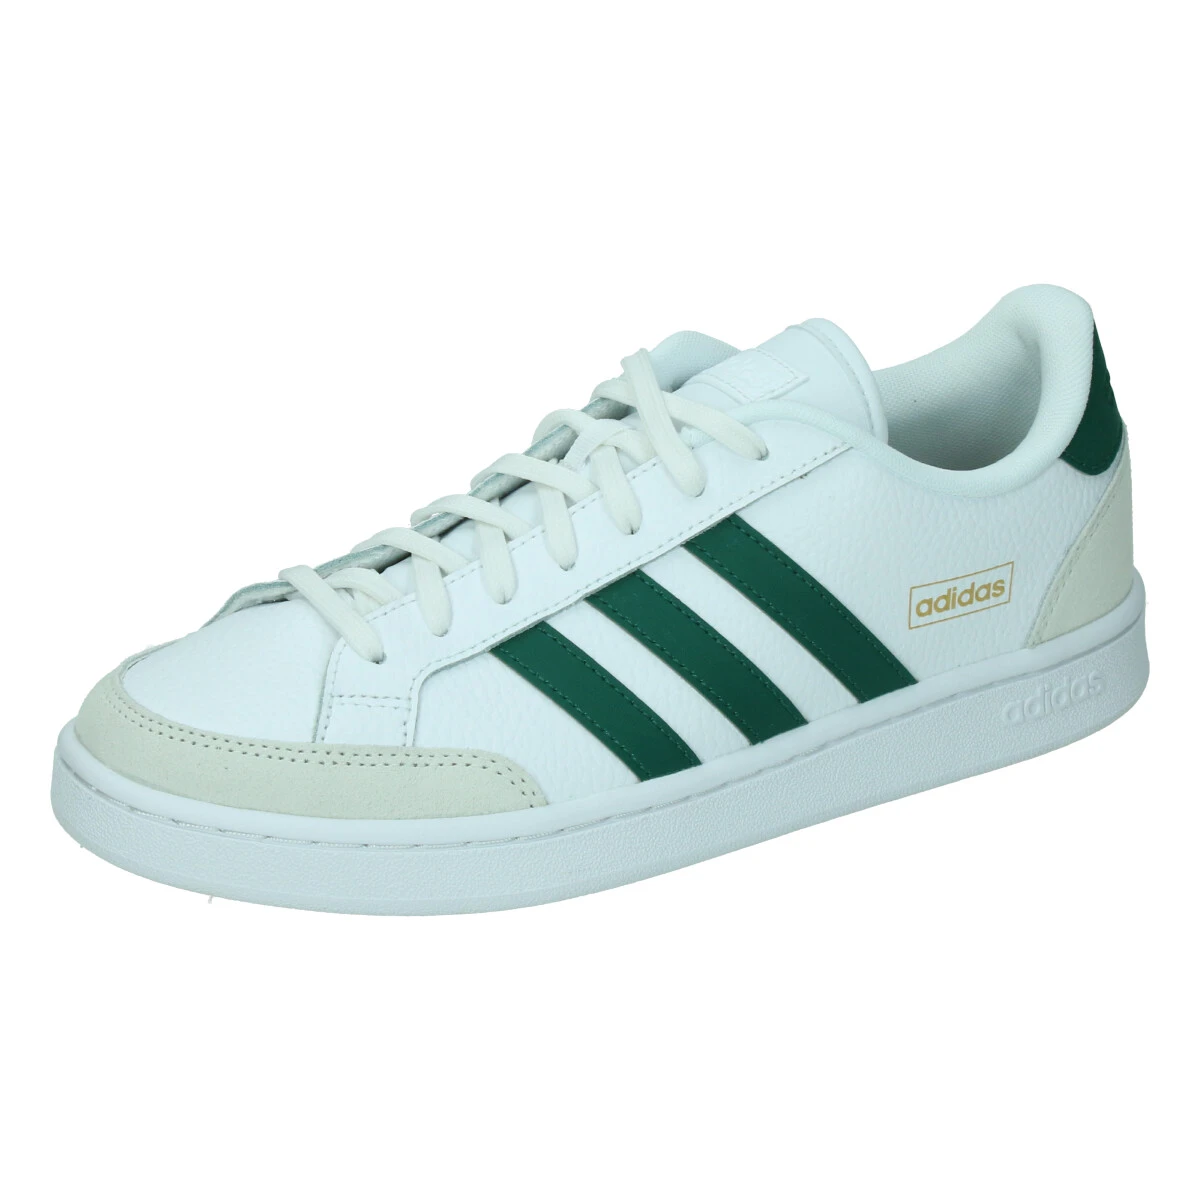 Adidas Grand Court SE sneakers